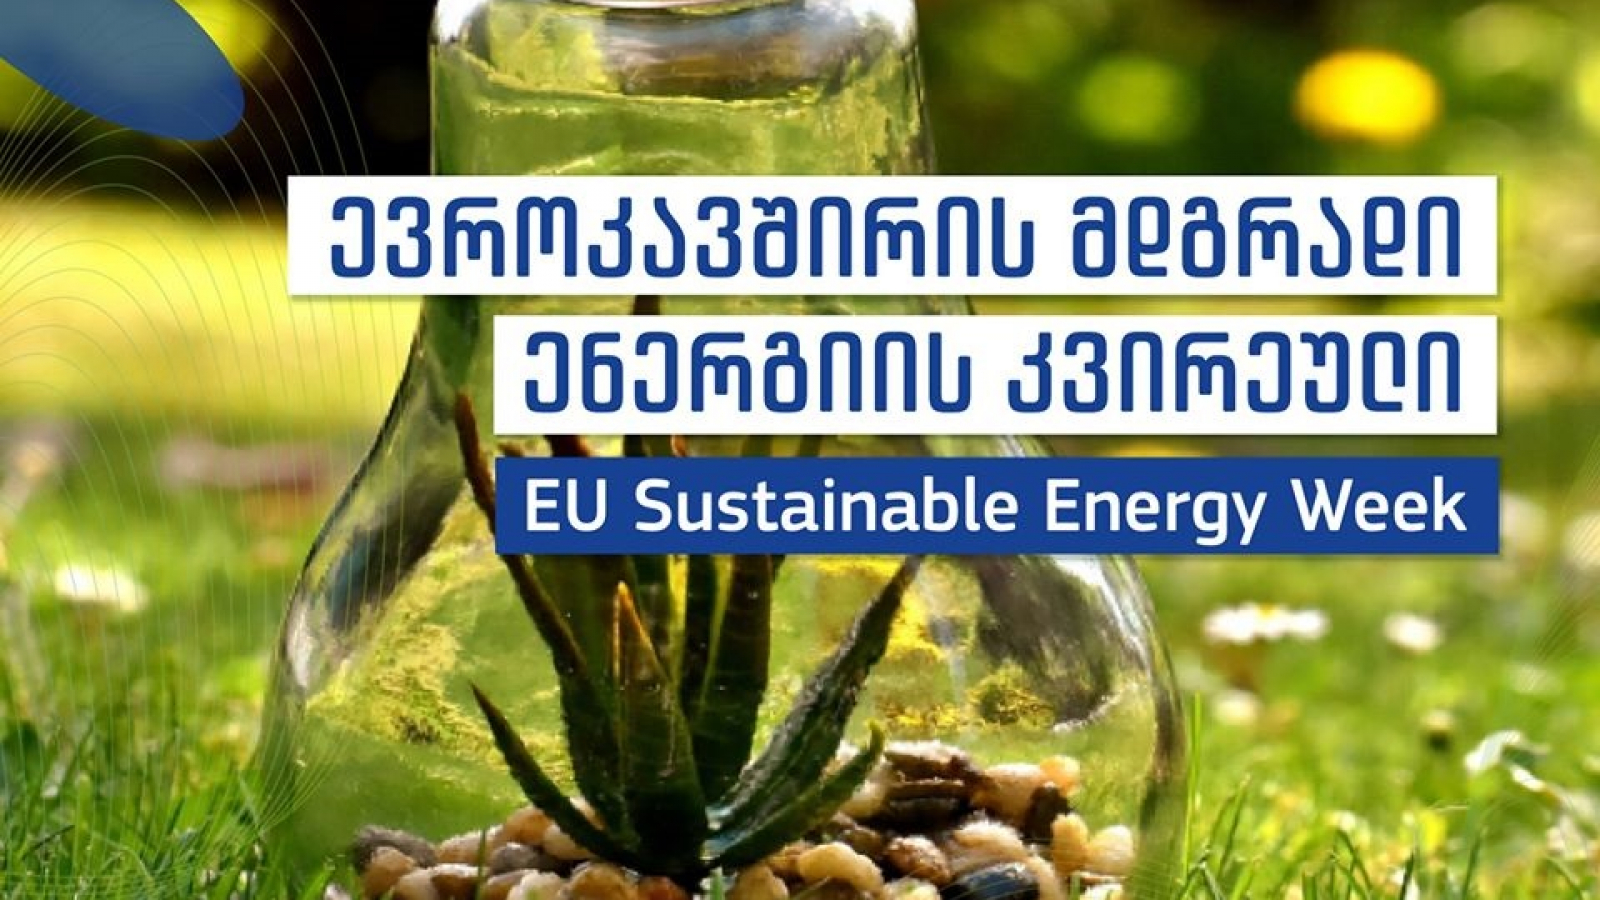 Georgian cities celebrate Energy Days 2020 with virtual events 